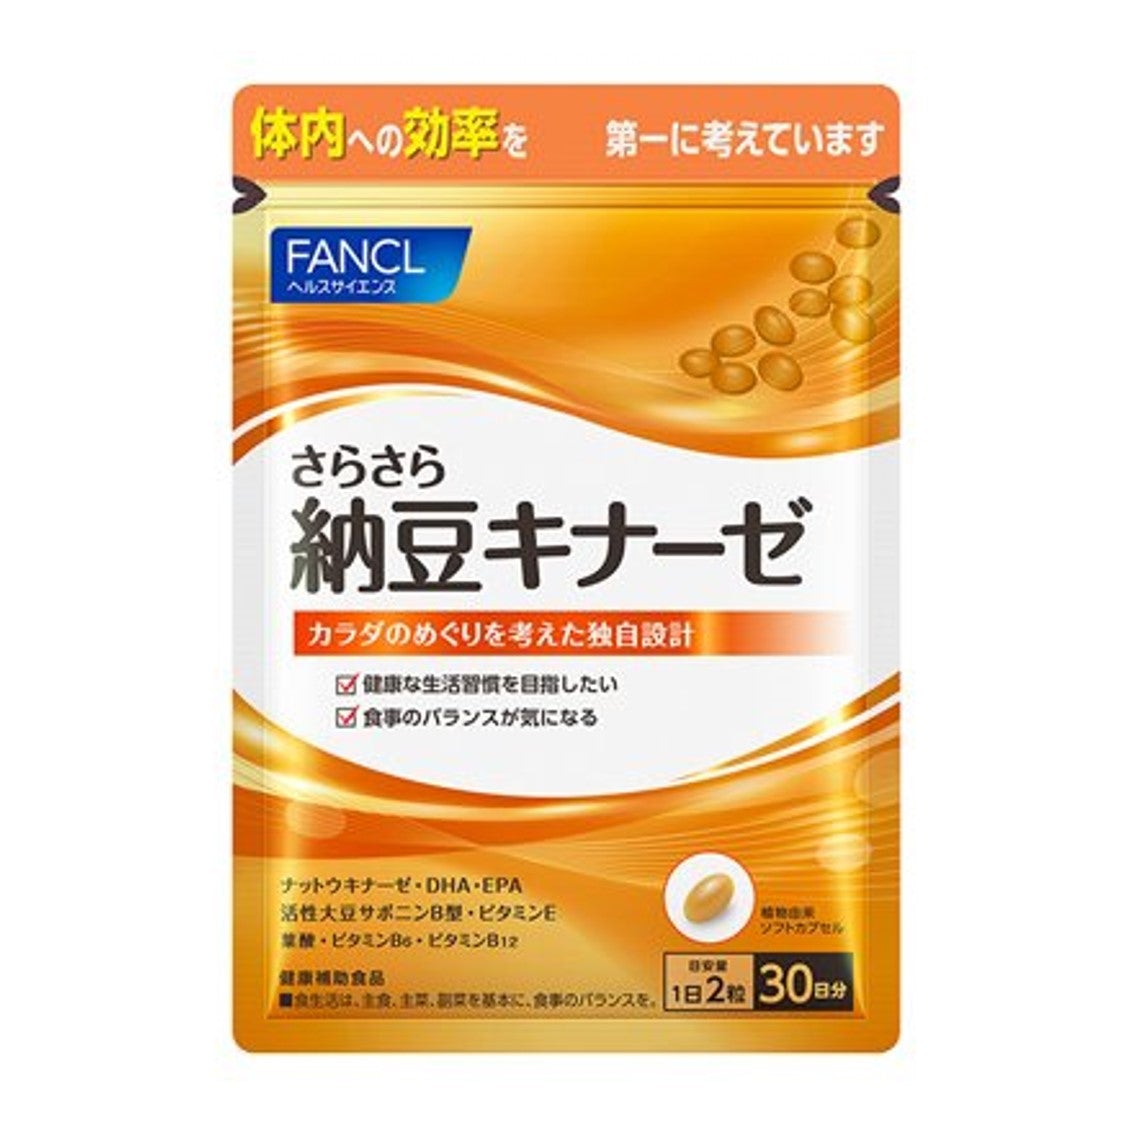 fancl-healthy-blood-support